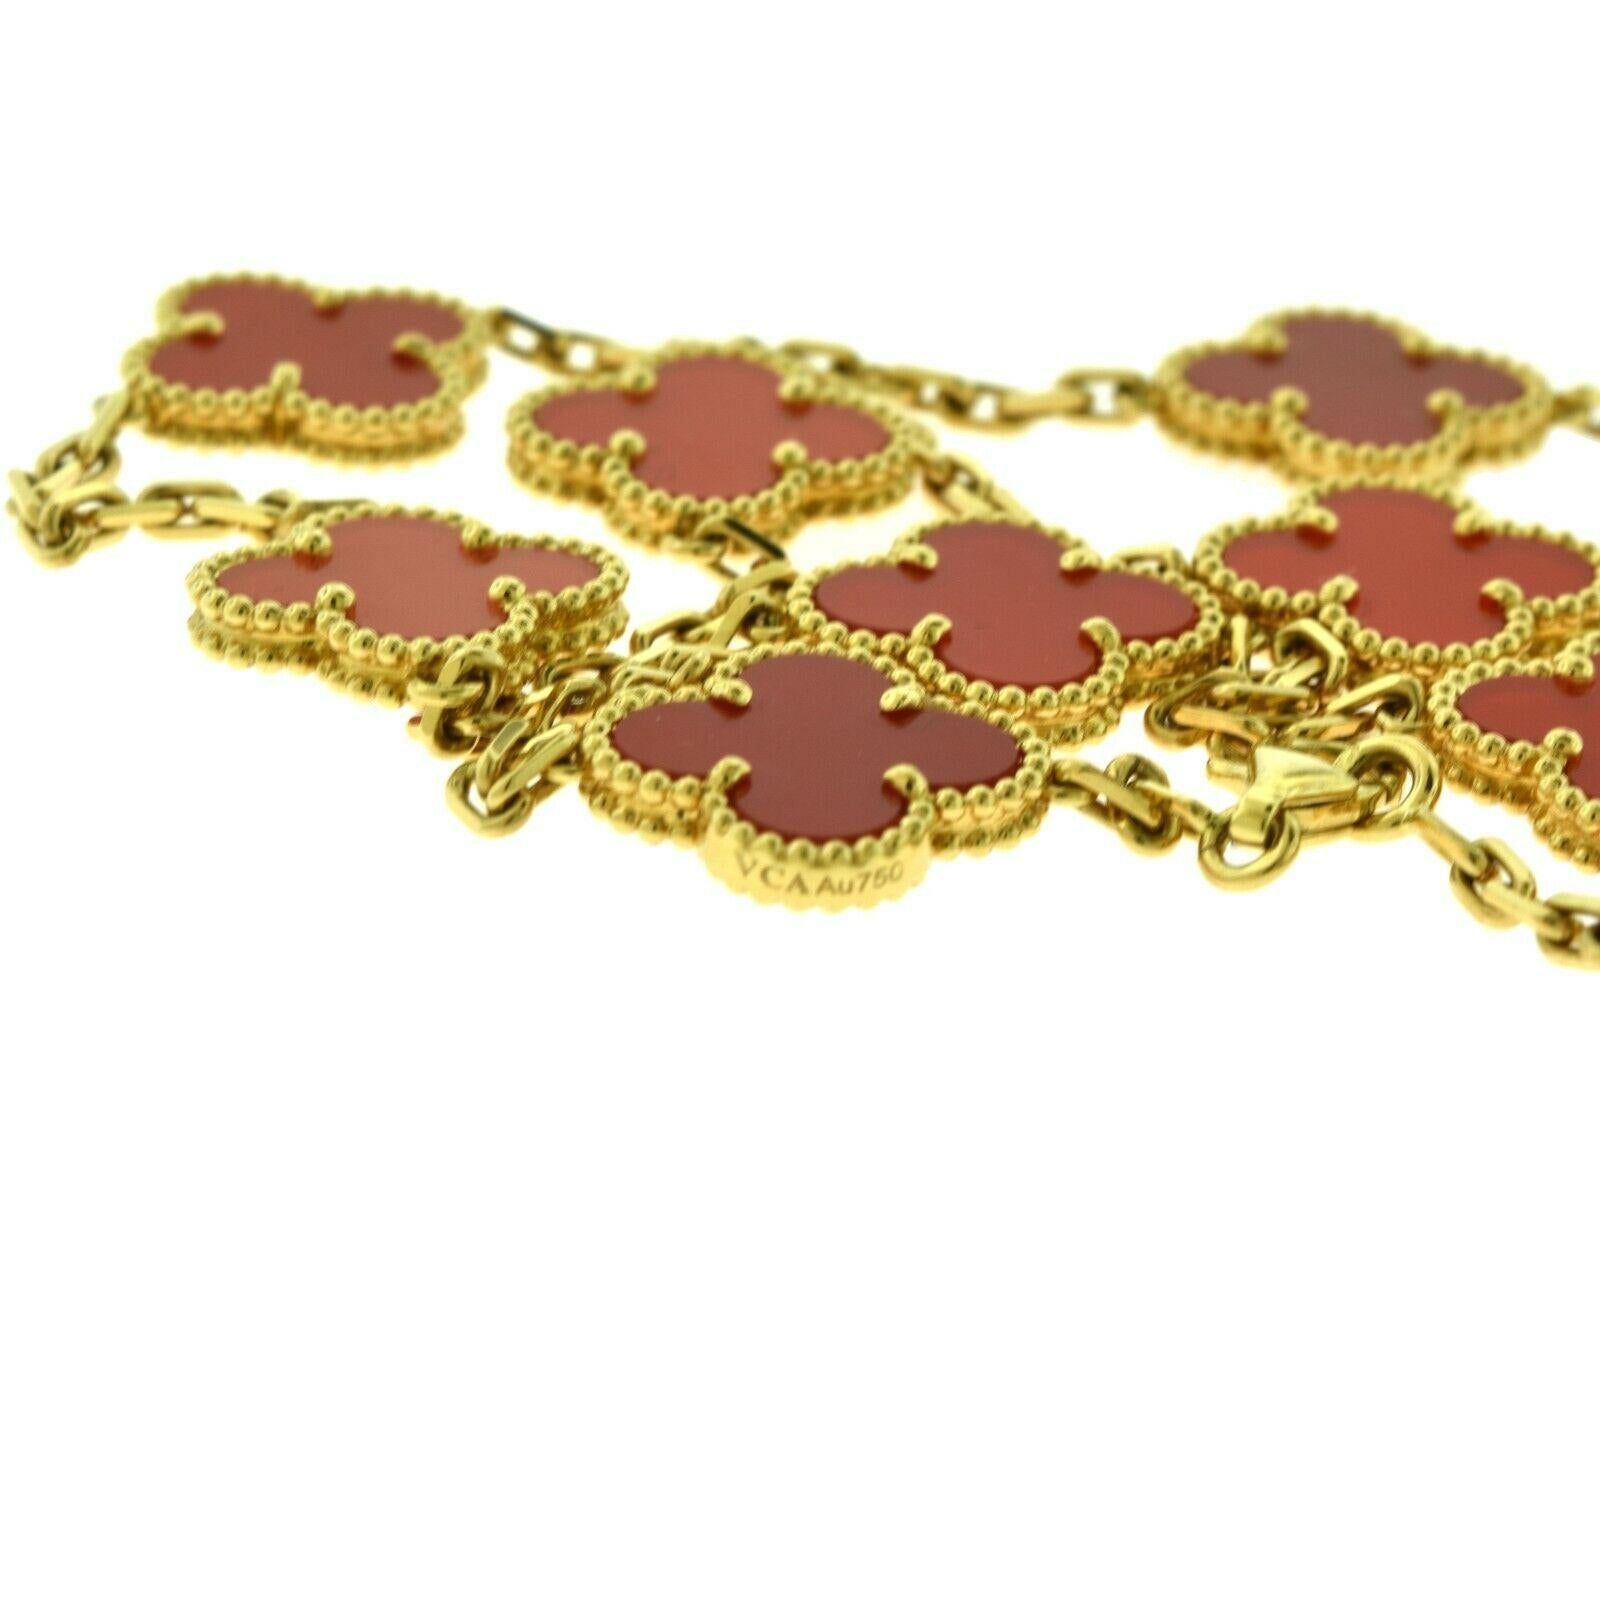 Designer: Van Cleef & Arpels

Collection: Vintage Alhambra

Style: 10 Motif Necklace

Stones: Red Carnelian Onyx 

Metal Type: Yellow Gold

Metal Purity: 18k​​​​​​​

Necklace Length: 16.8 inches​​​​​​​

Closure: Lobster Clasp

​Includes: Brilliance